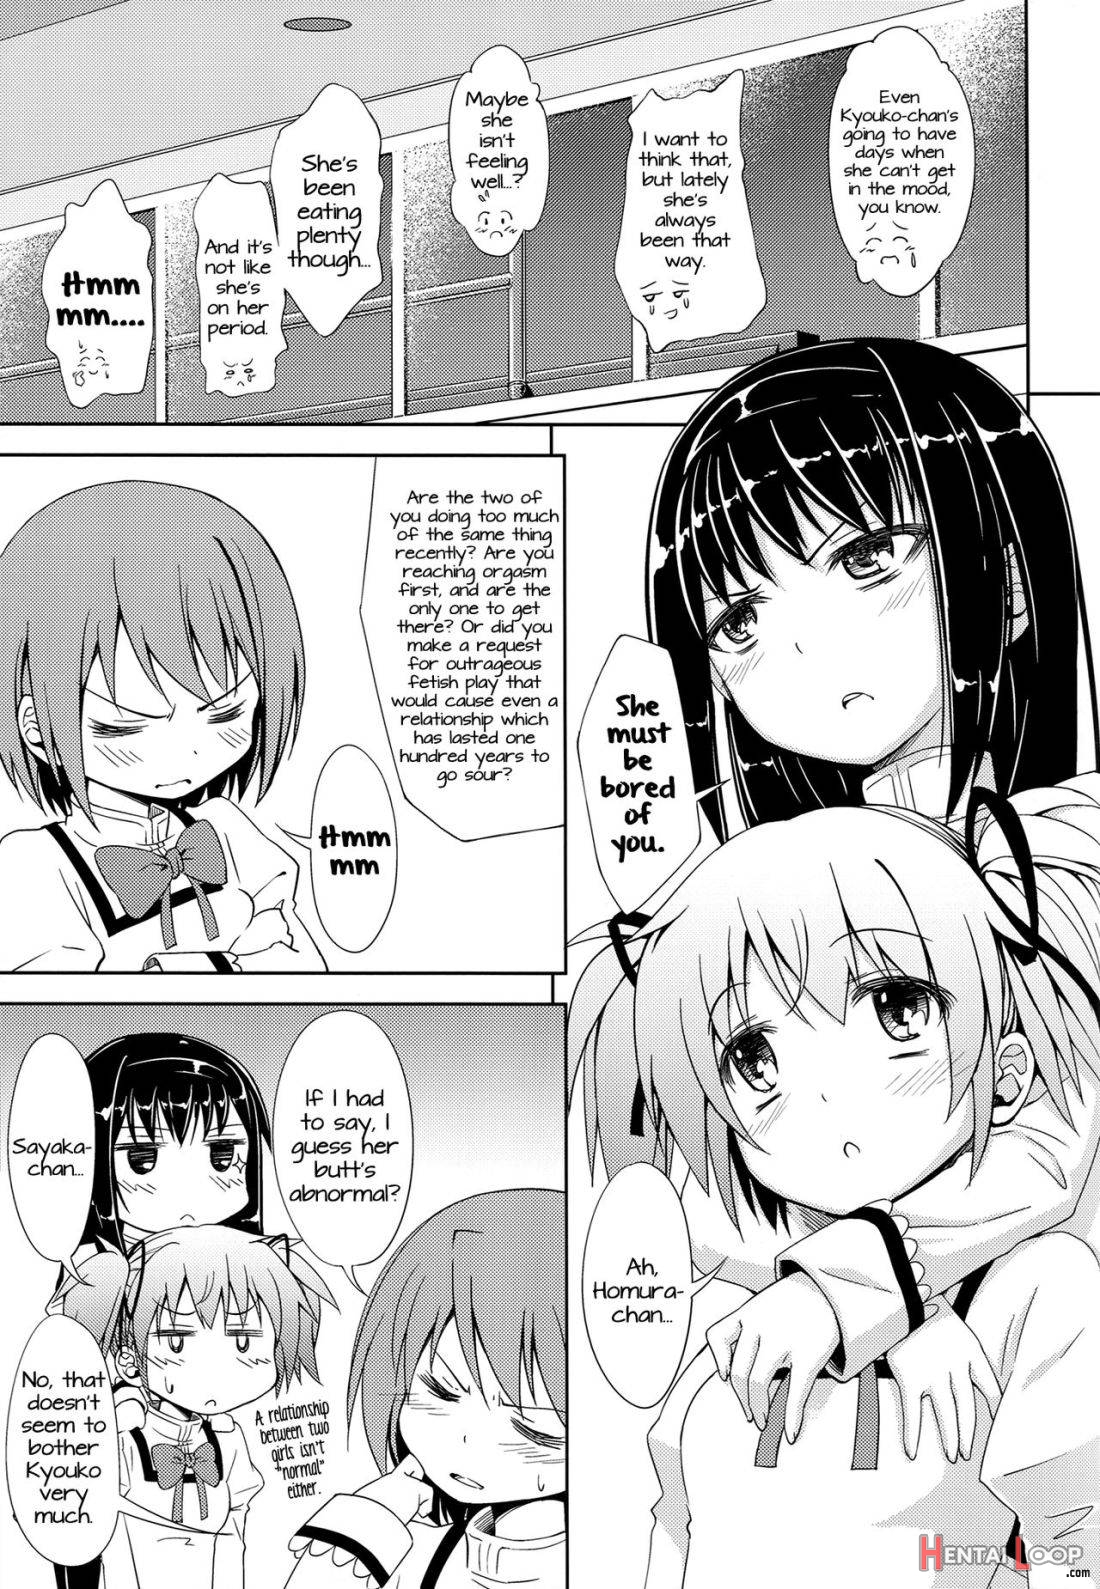 Lovely Girls’ Lily vol.4 page 6